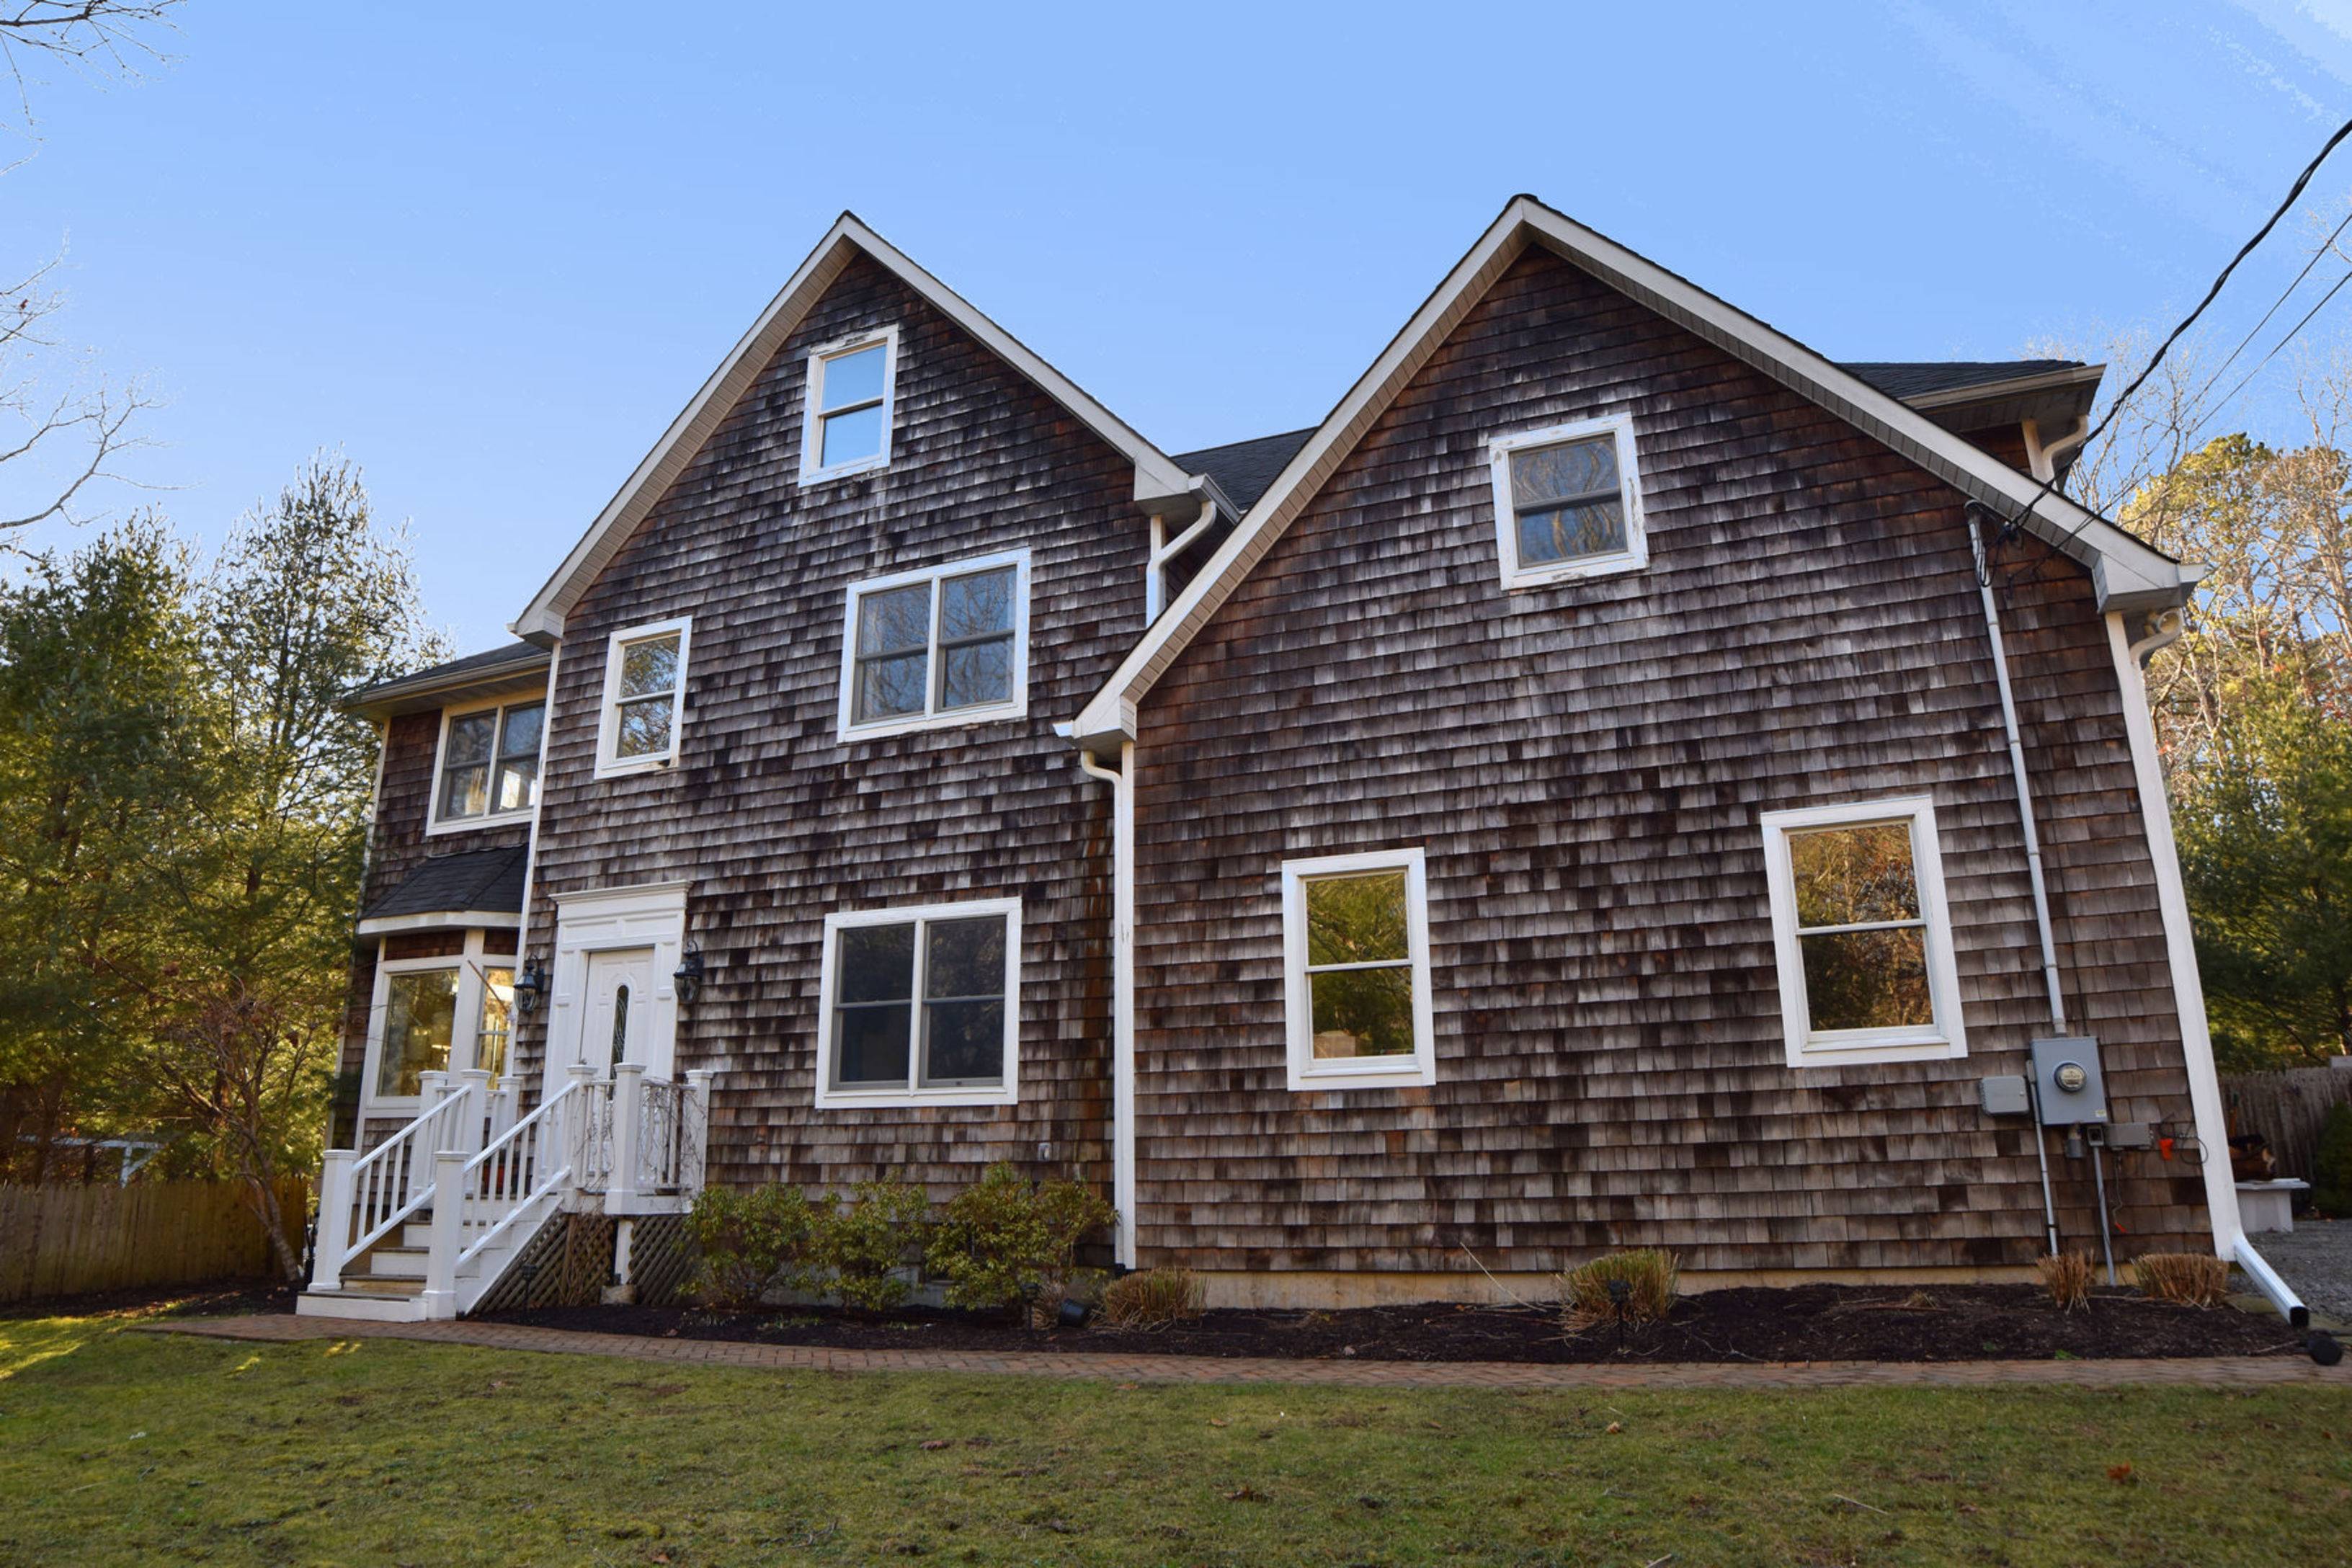 Ideal Location Midway to Southampton, Sag Harbor or Water Mill